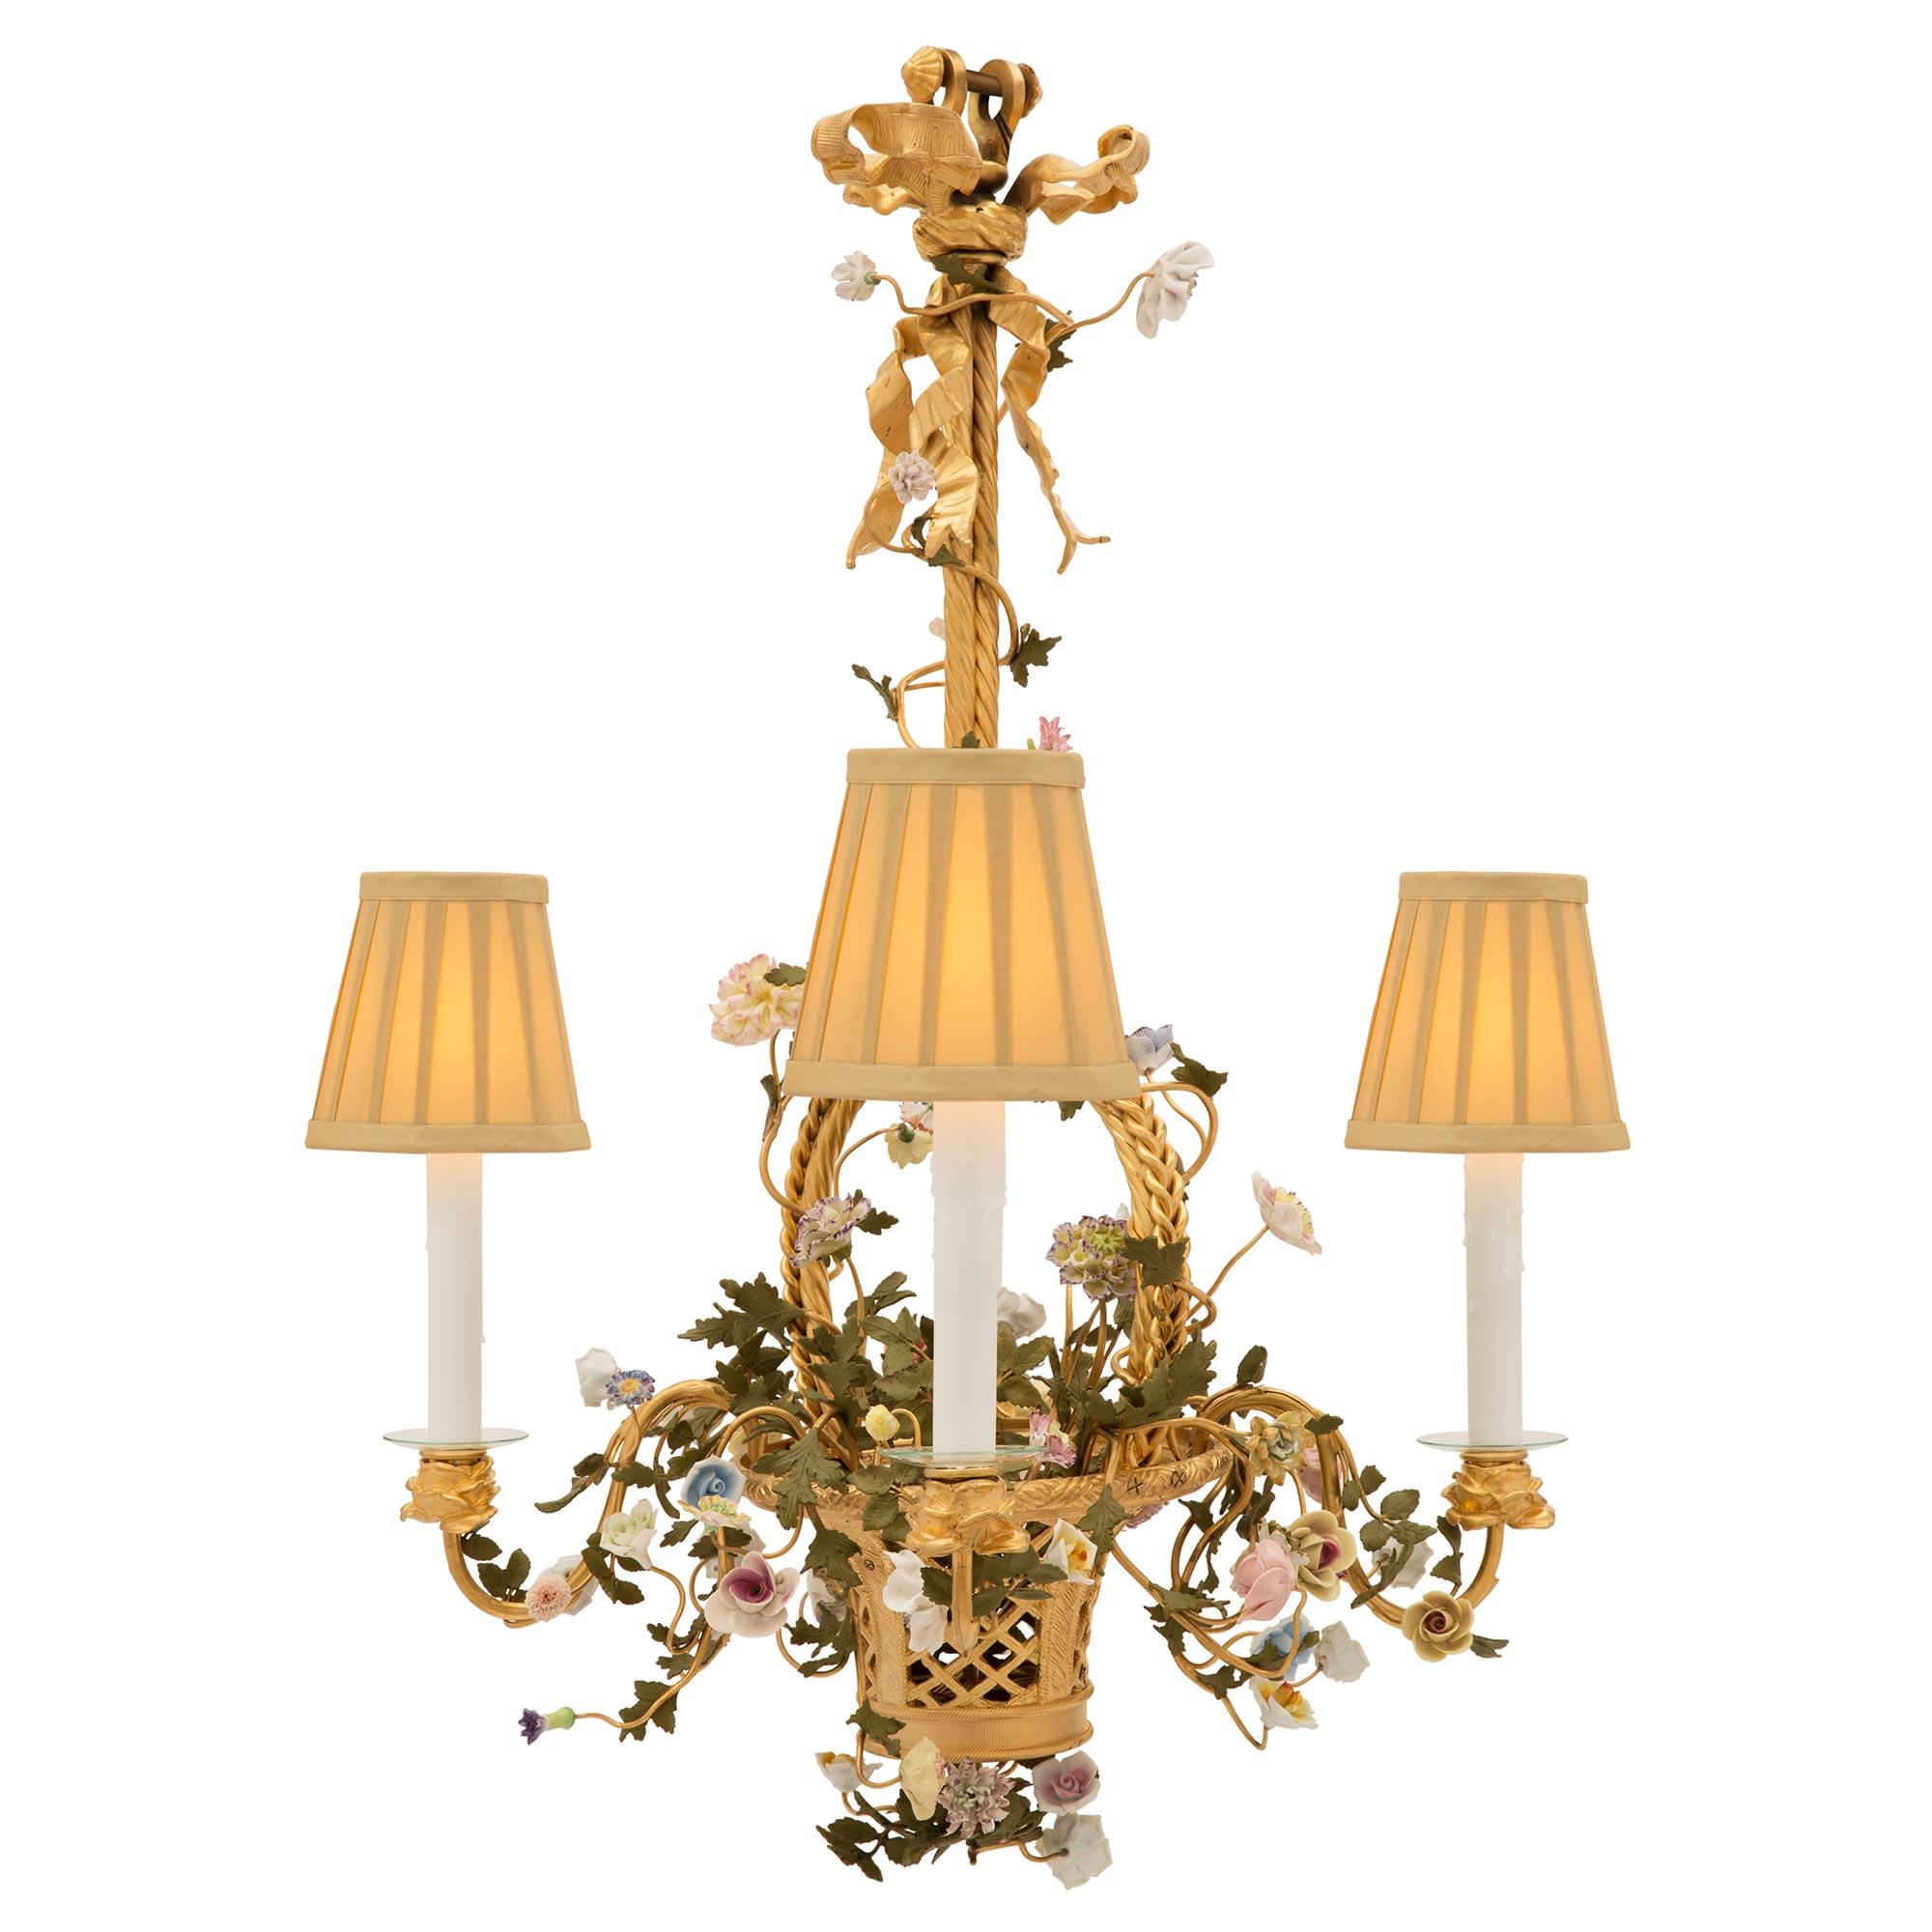 A beautiful and most unique French 19th century Louis XVI st. ormolu, Saxe porcelain and patinated metal four arm chandelier. The chandelier is centered by a charming and wonderfully executed woven ormolu basket from which beautiful and vividly